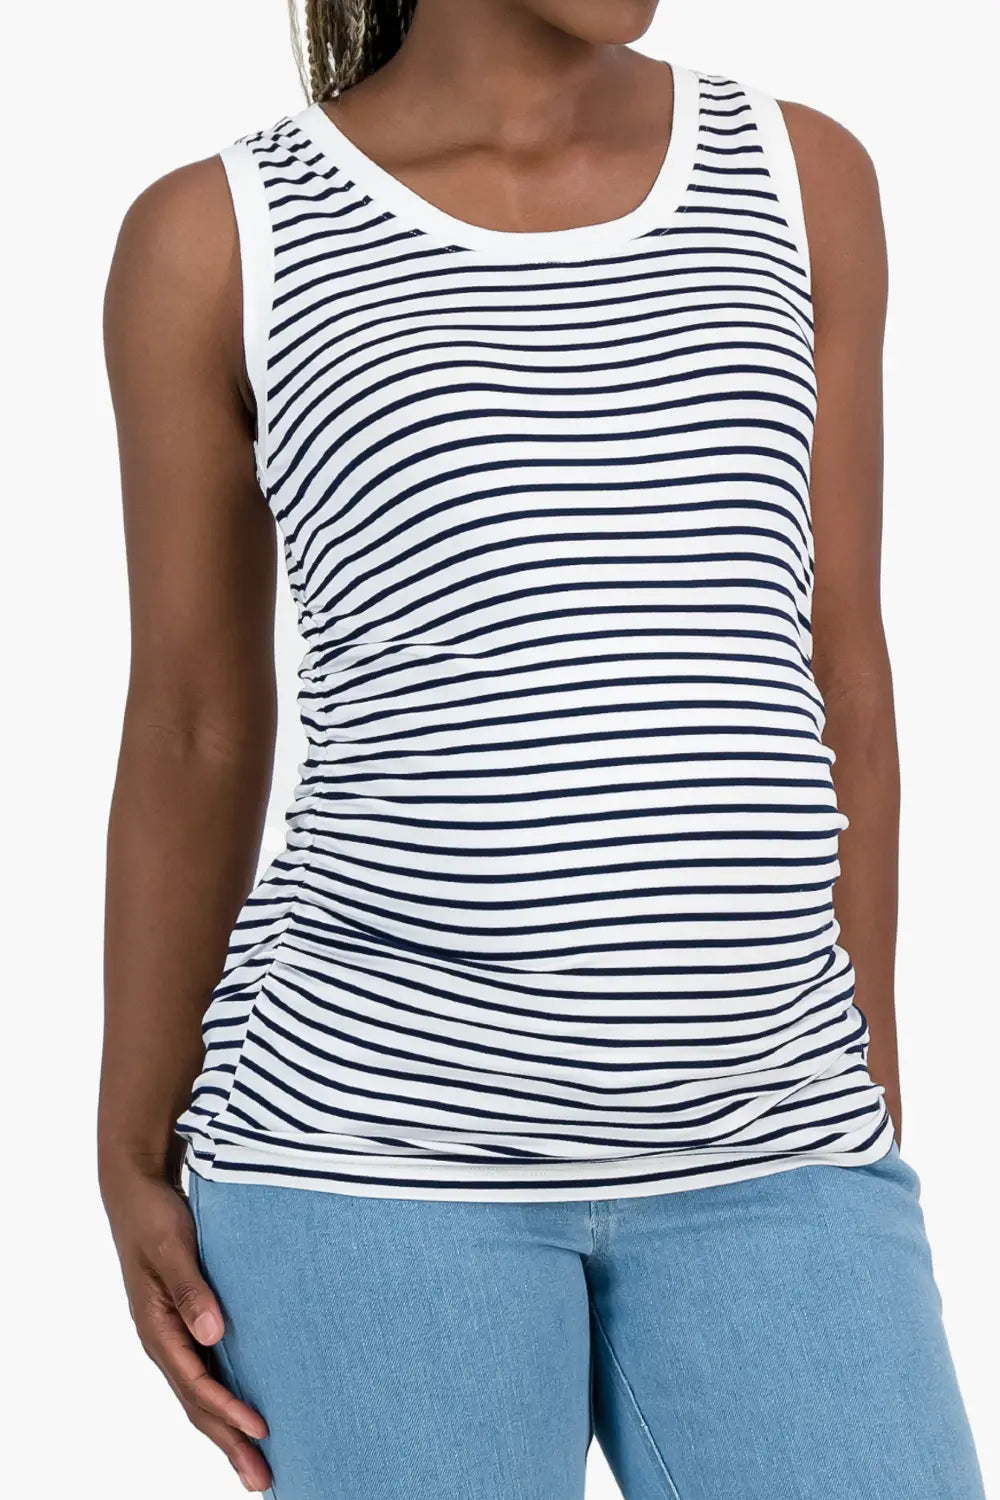 Striped Everyday Tank Top